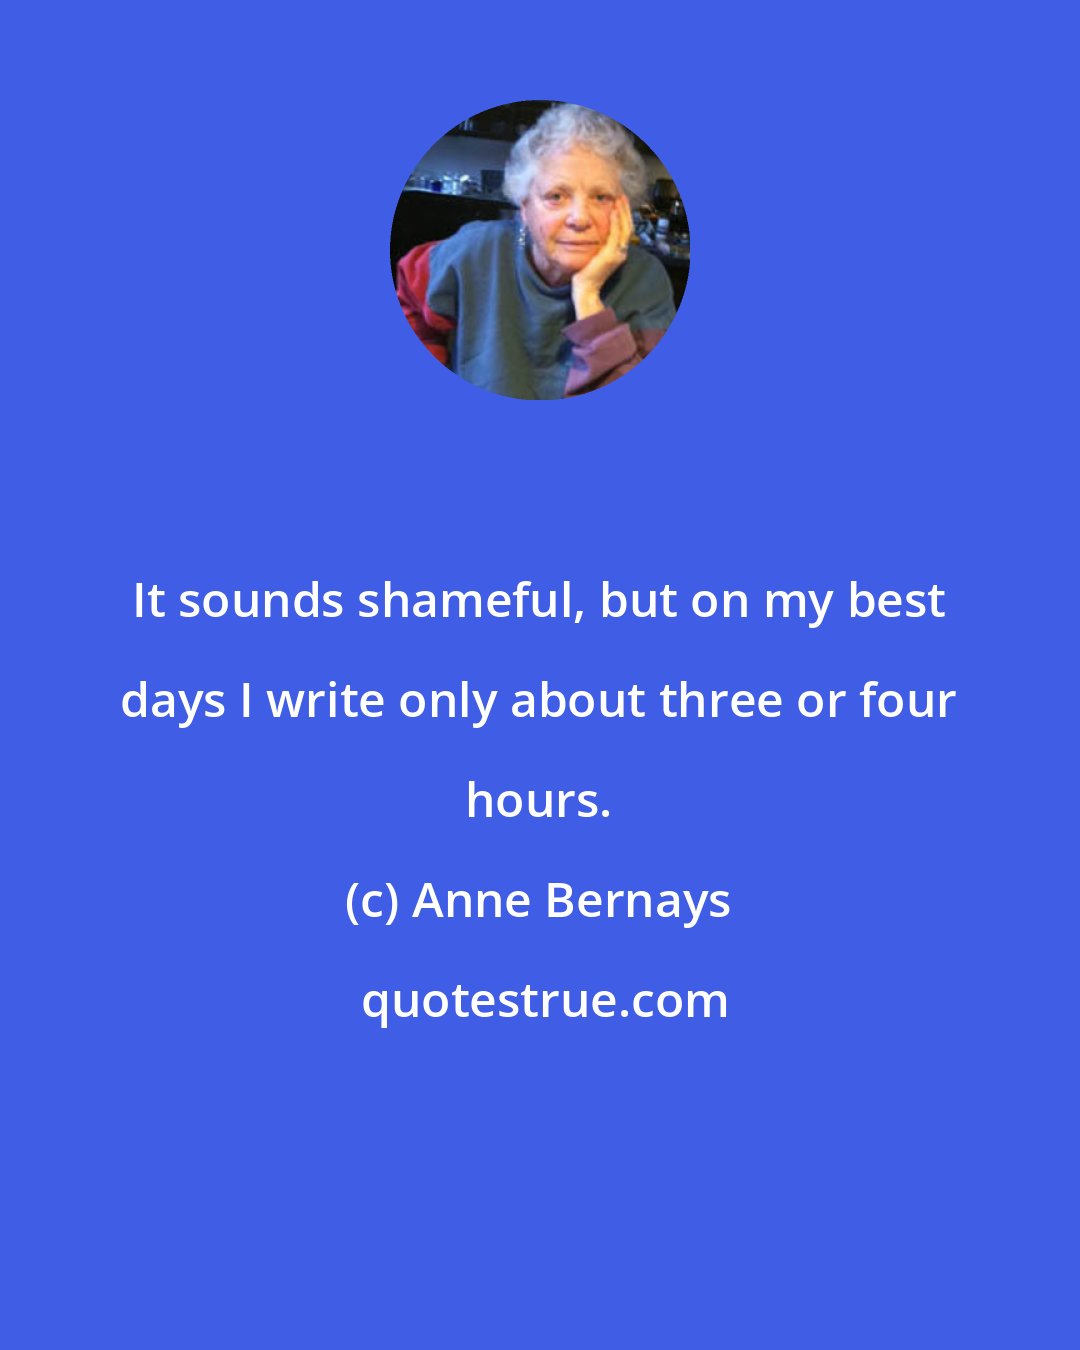 Anne Bernays: It sounds shameful, but on my best days I write only about three or four hours.